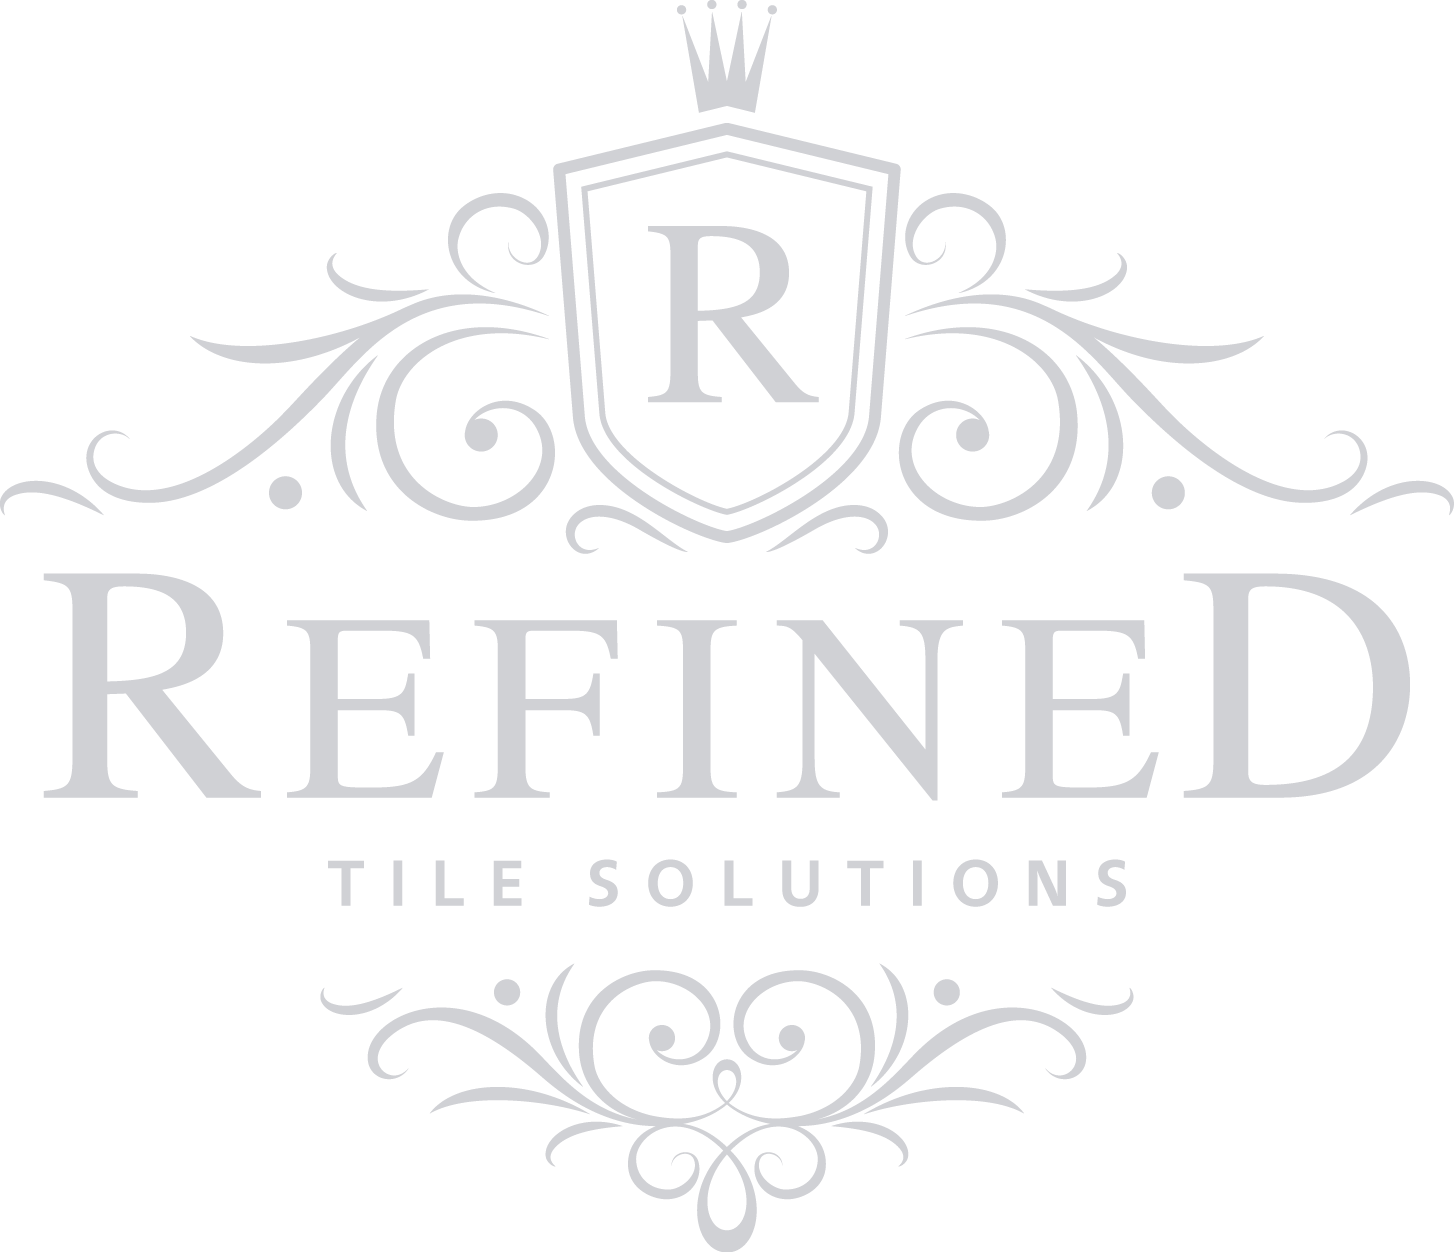 Refined Tile Solutions